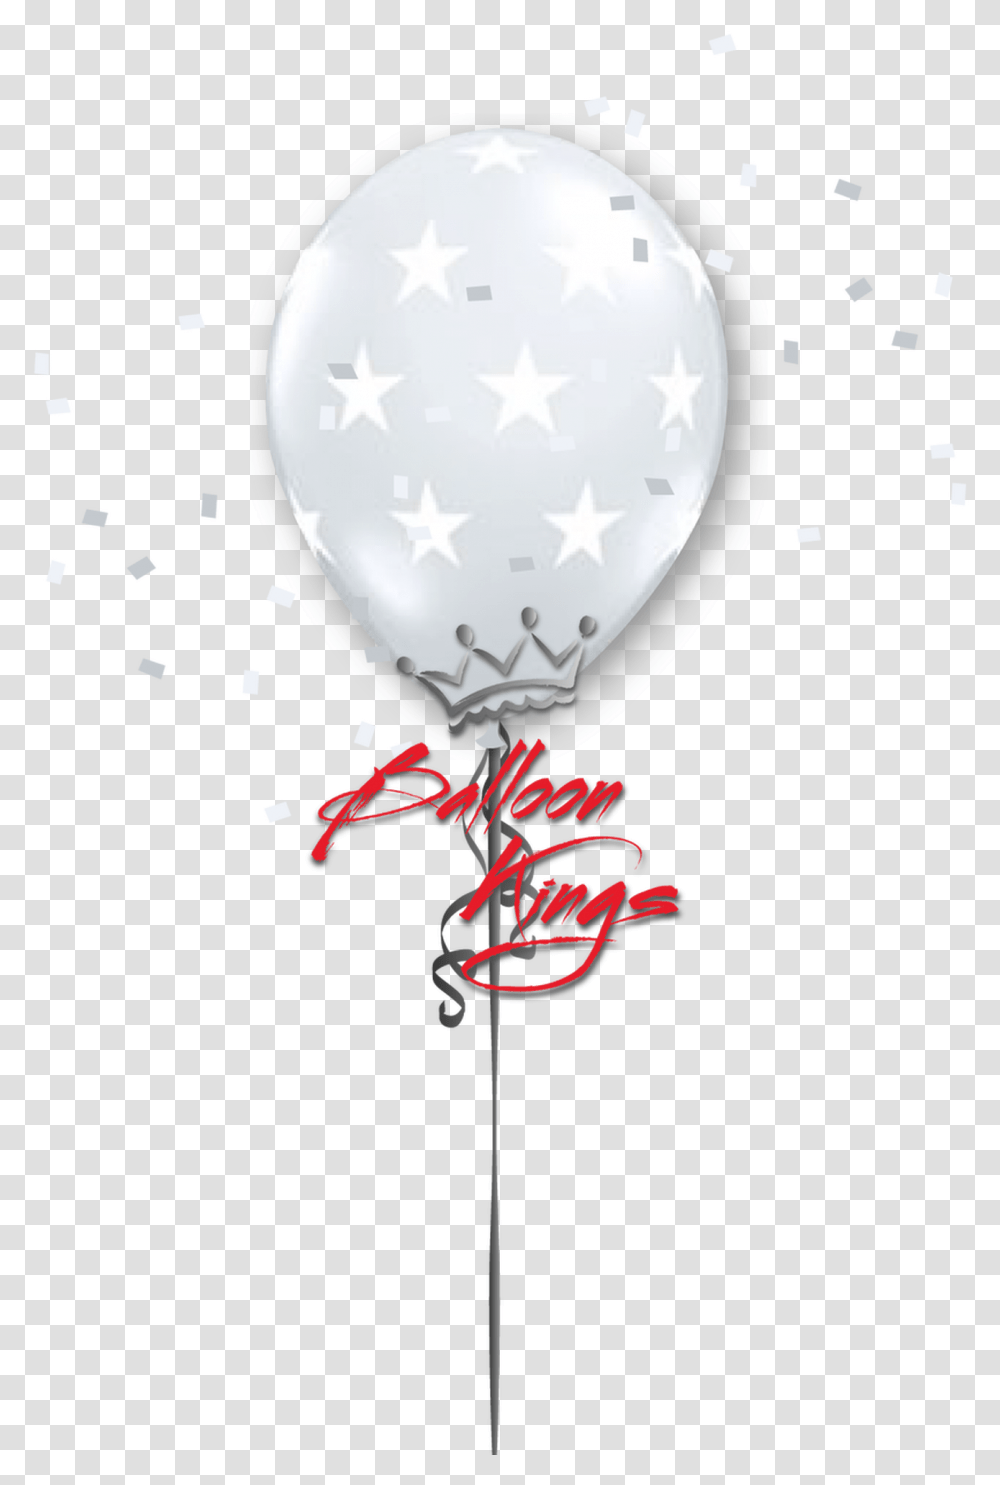 Latex American Stars Portable Network Graphics, Balloon, Glass, Lamp Transparent Png